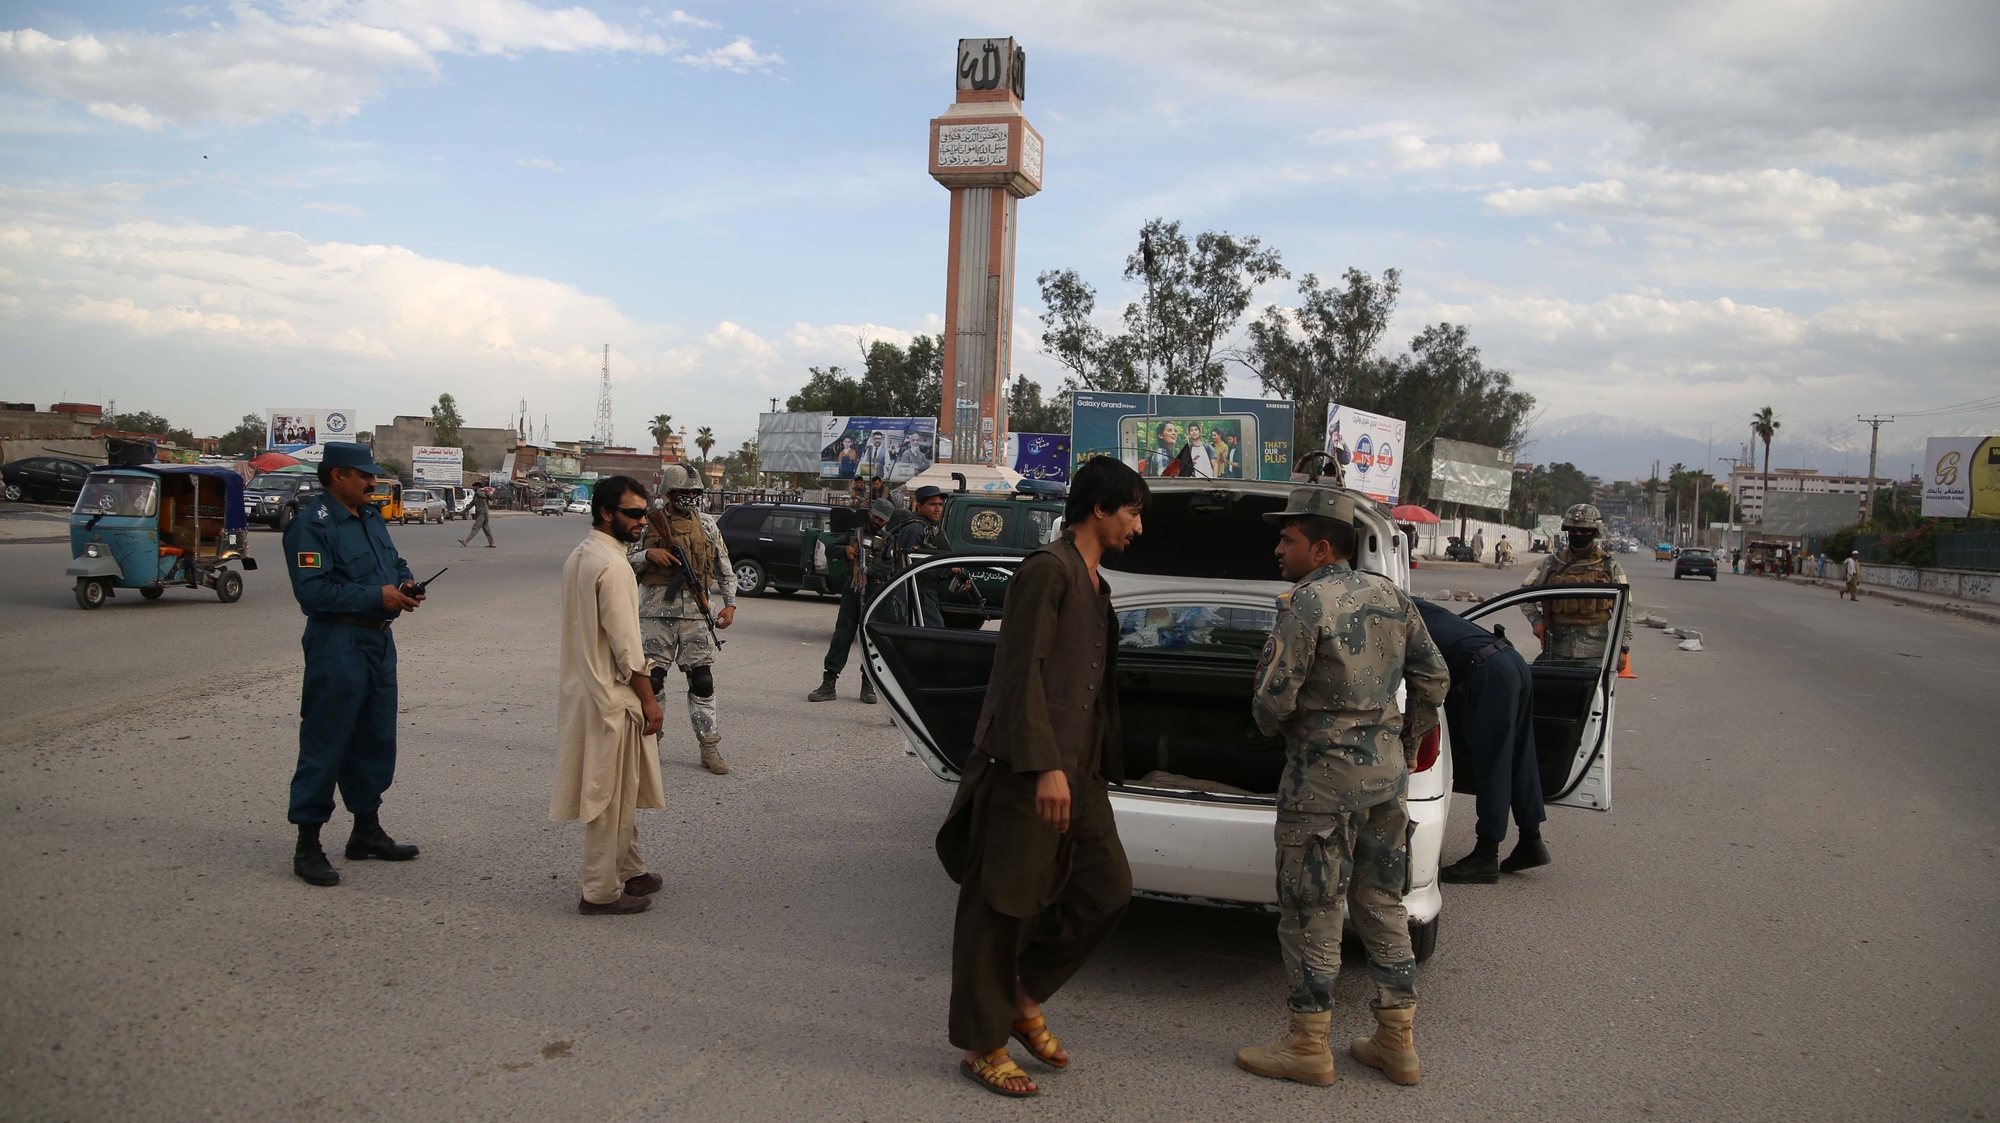 epa06705023 Afghan police search a vehicle at a checkpoint in Jalalabad, Afghanistan, 01 May 2018. Security in Jalalabad has been intensified after a recent wave of bomb blasts in different parts of the country.  EPA/GHULAMULLAH HABIBI